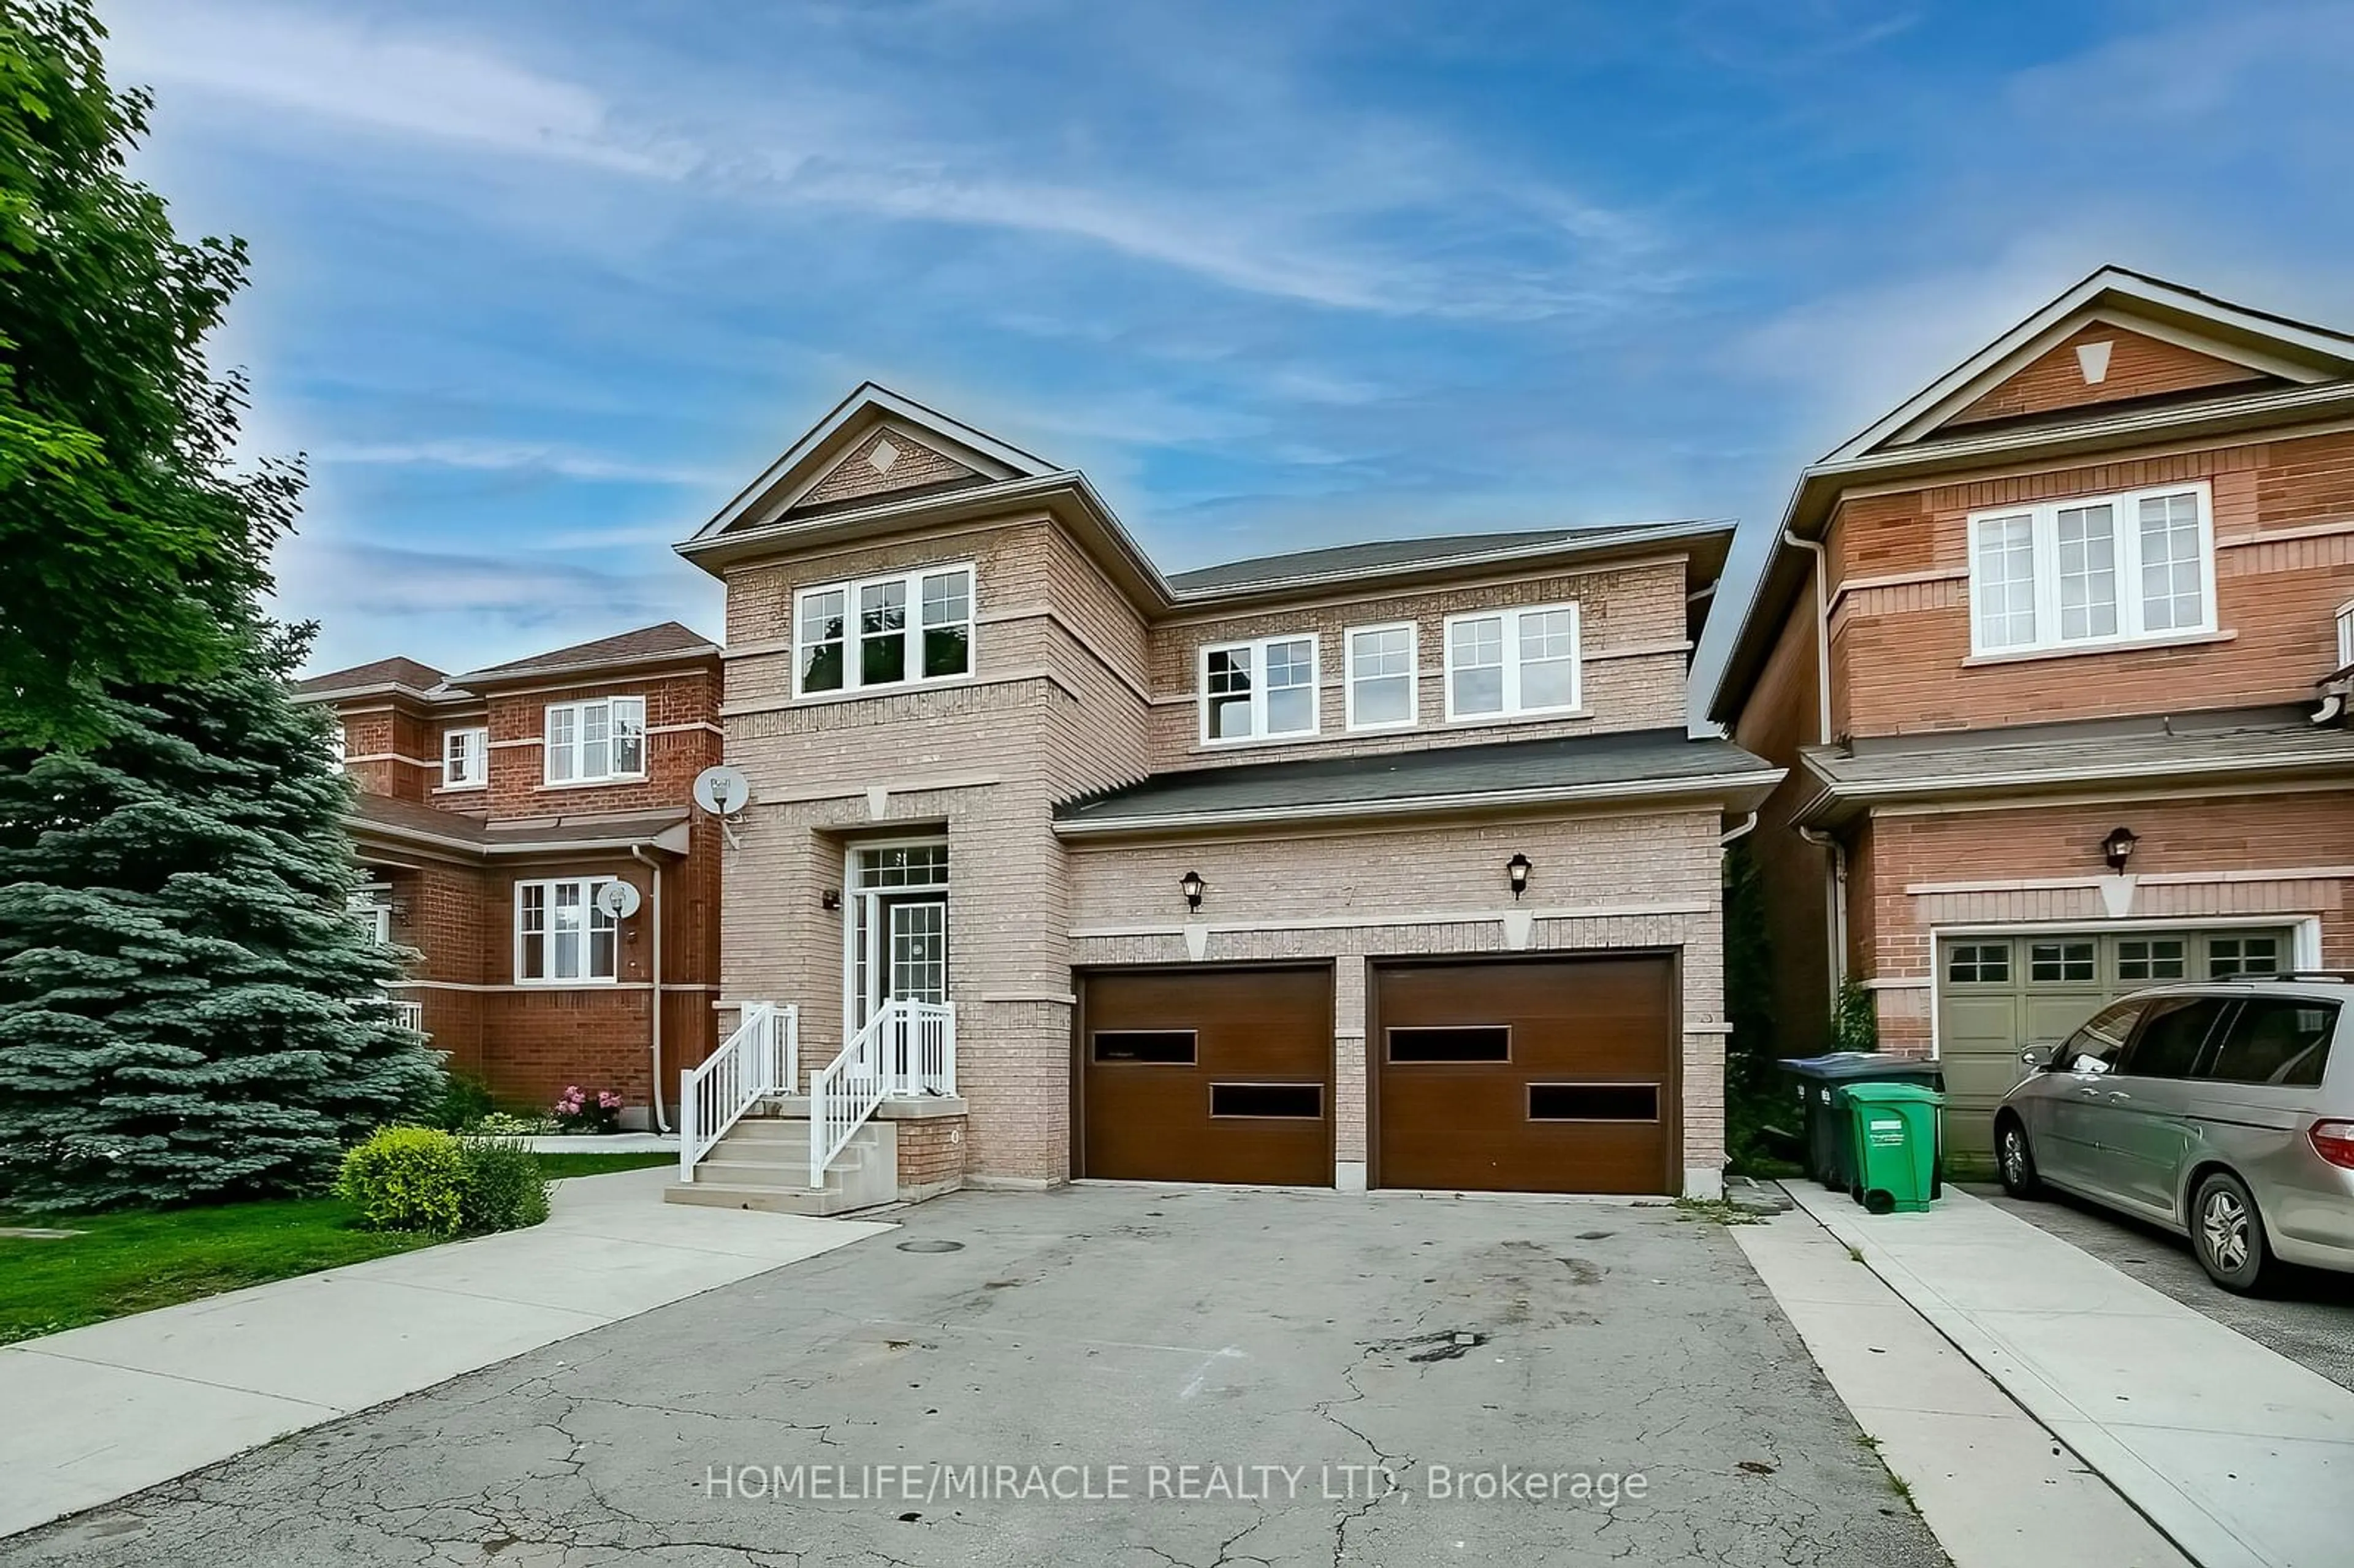 Home with brick exterior material for 7 Stephanie Ave, Brampton Ontario L6Y 5N3